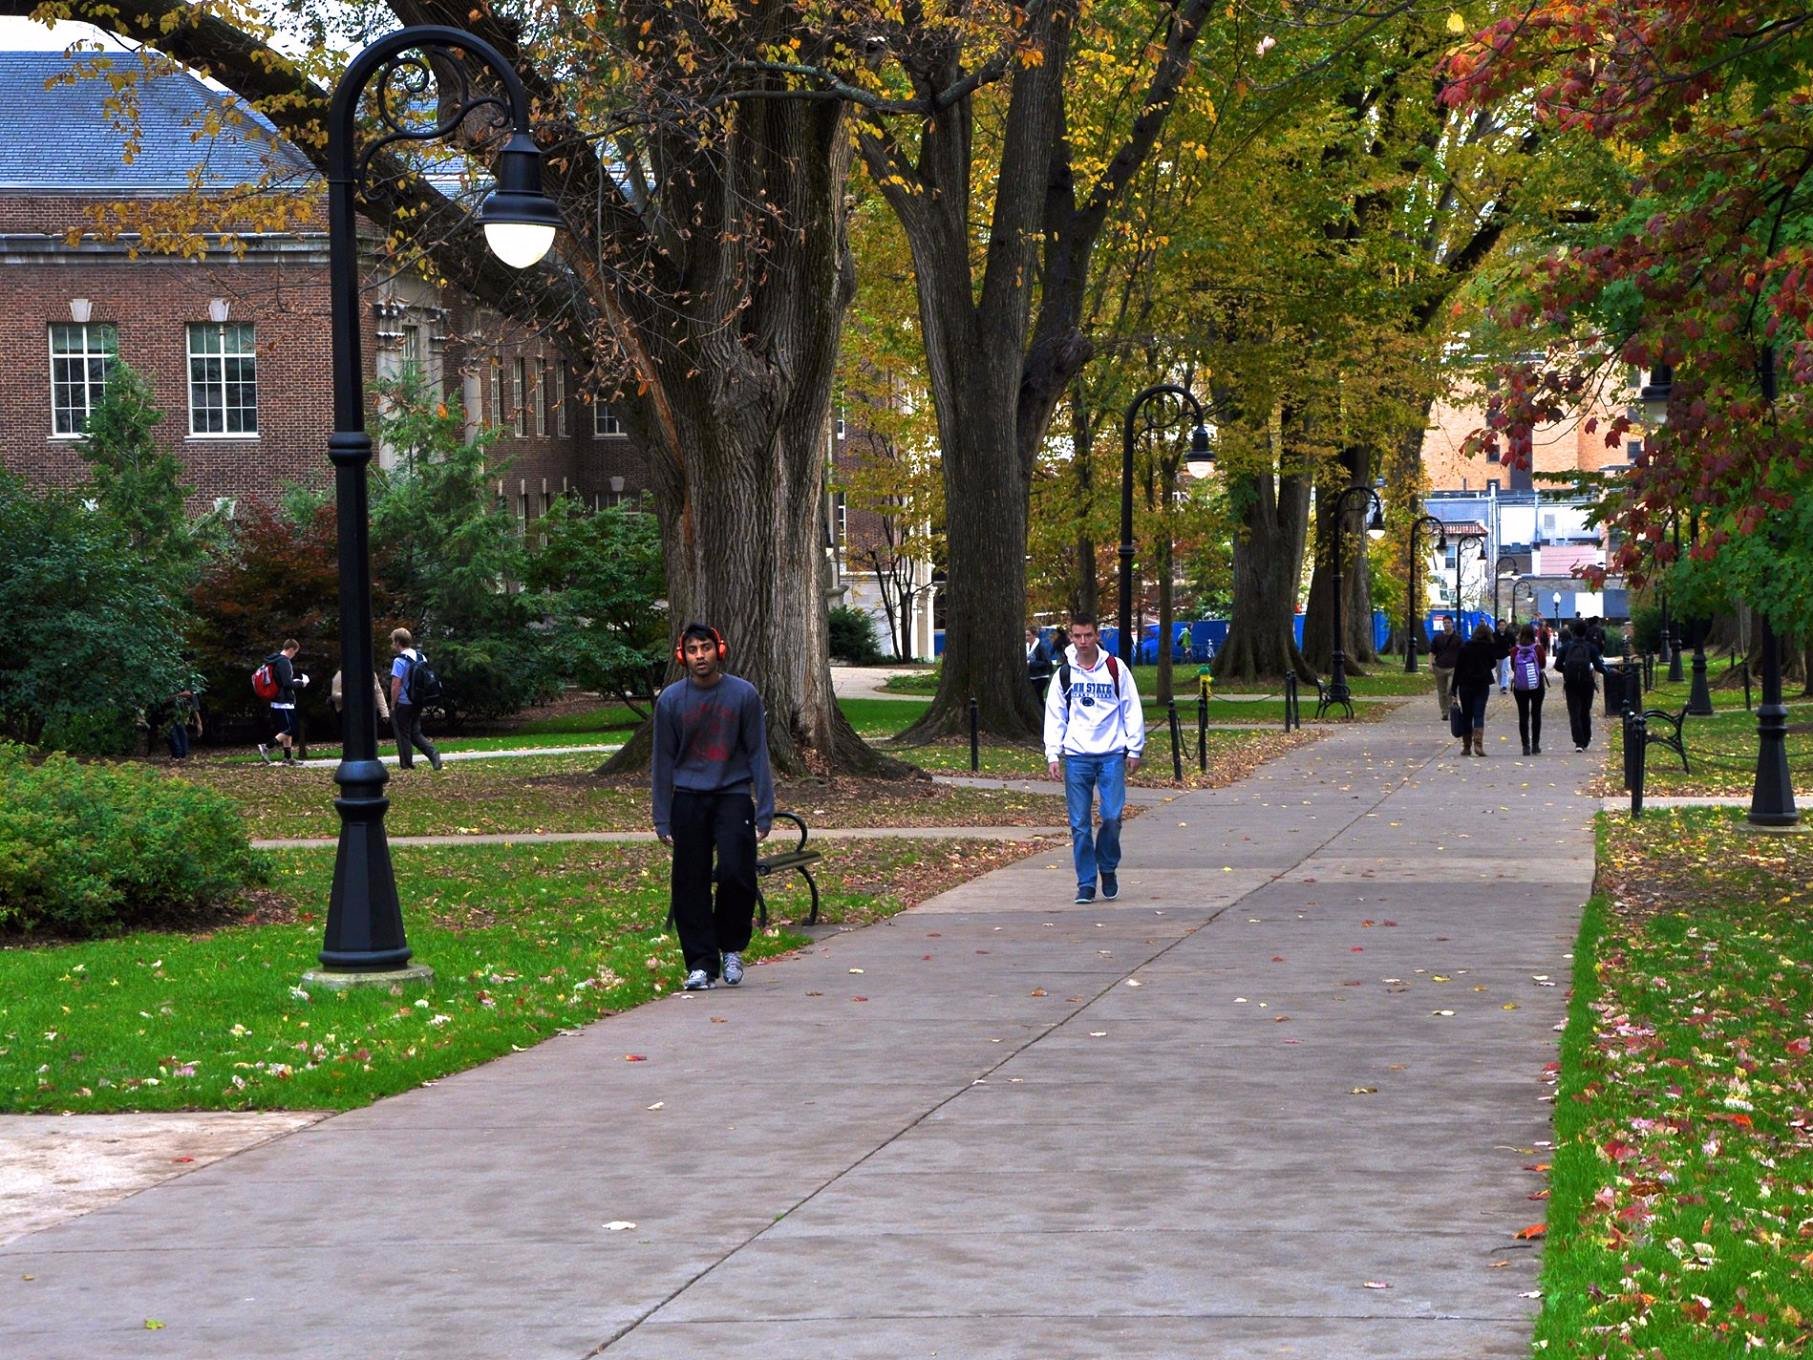 Penn State students on campus